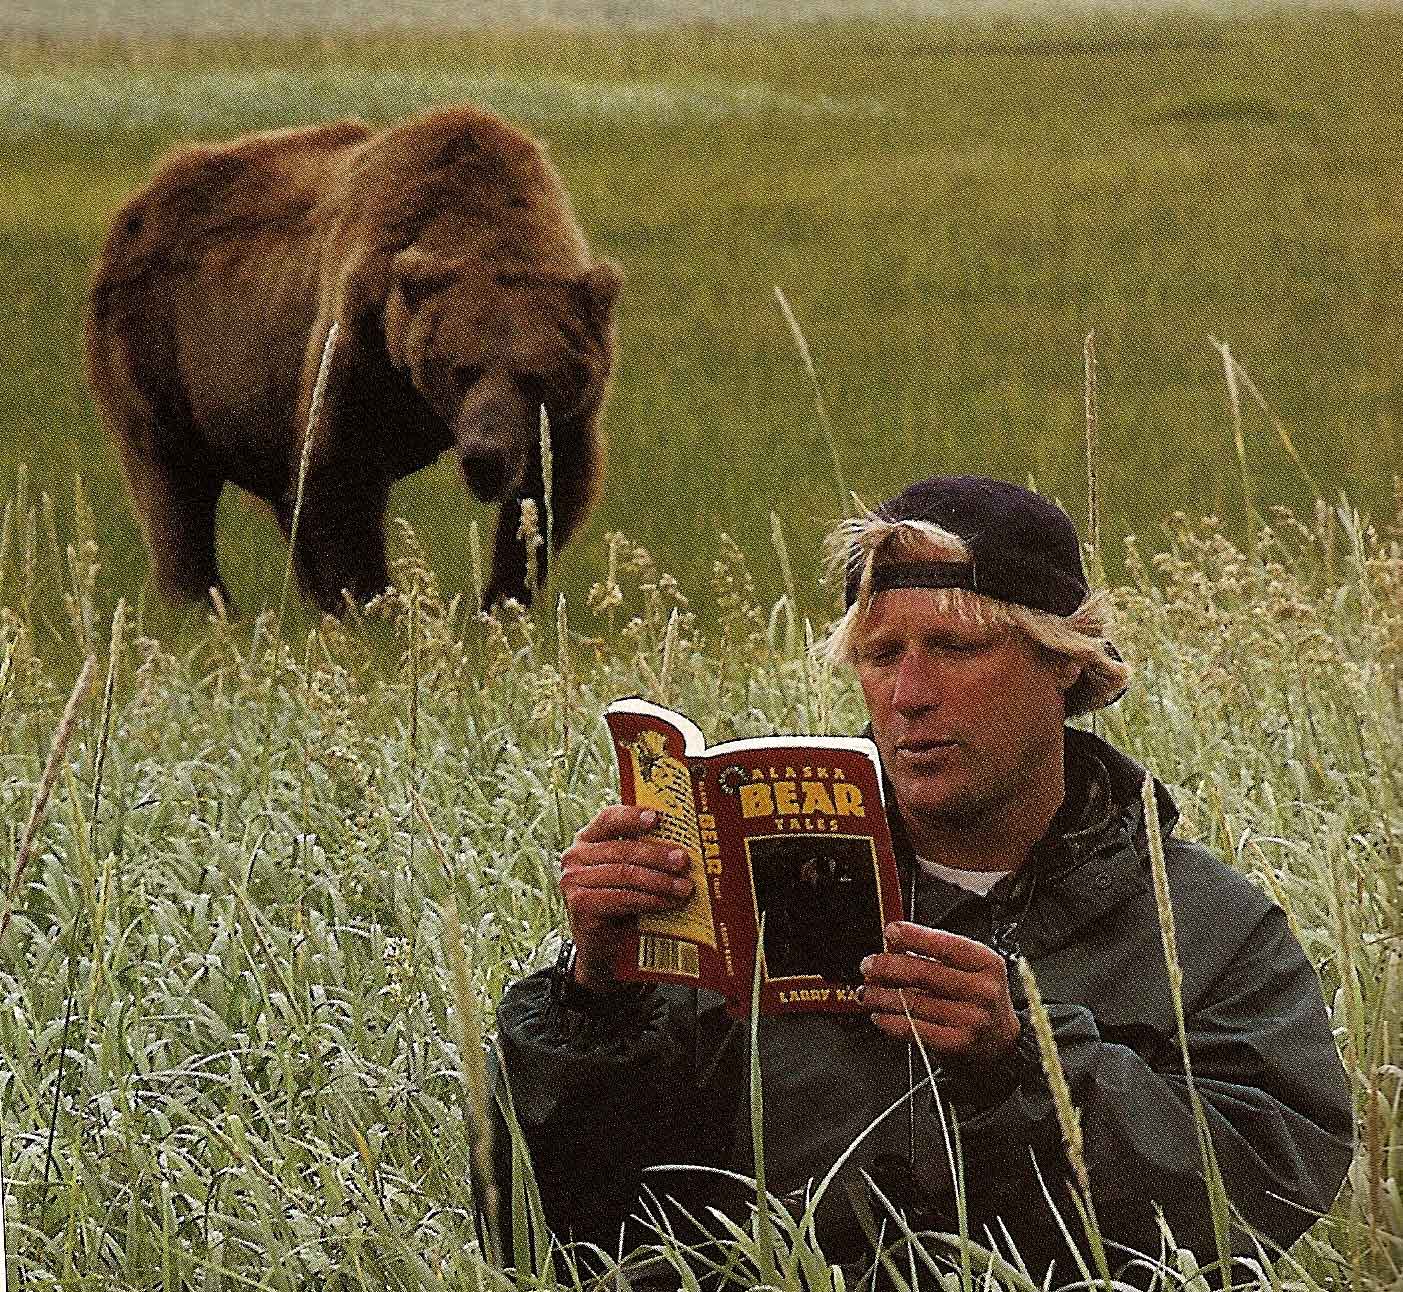 In 2003, bear enthusiast Timothy Treadwell and his girlfriend Amie Huguenard were killed and partially eaten by a grizzly bear in Katmai National Park. At some point, he heard a bear outside the tent. He went out to see it with his camera on, but the lens still capped. The bear began attacking him and six minutes of audio can be found online of him shouting to his girlfriend, and his girlfriend yelling back to play dead.